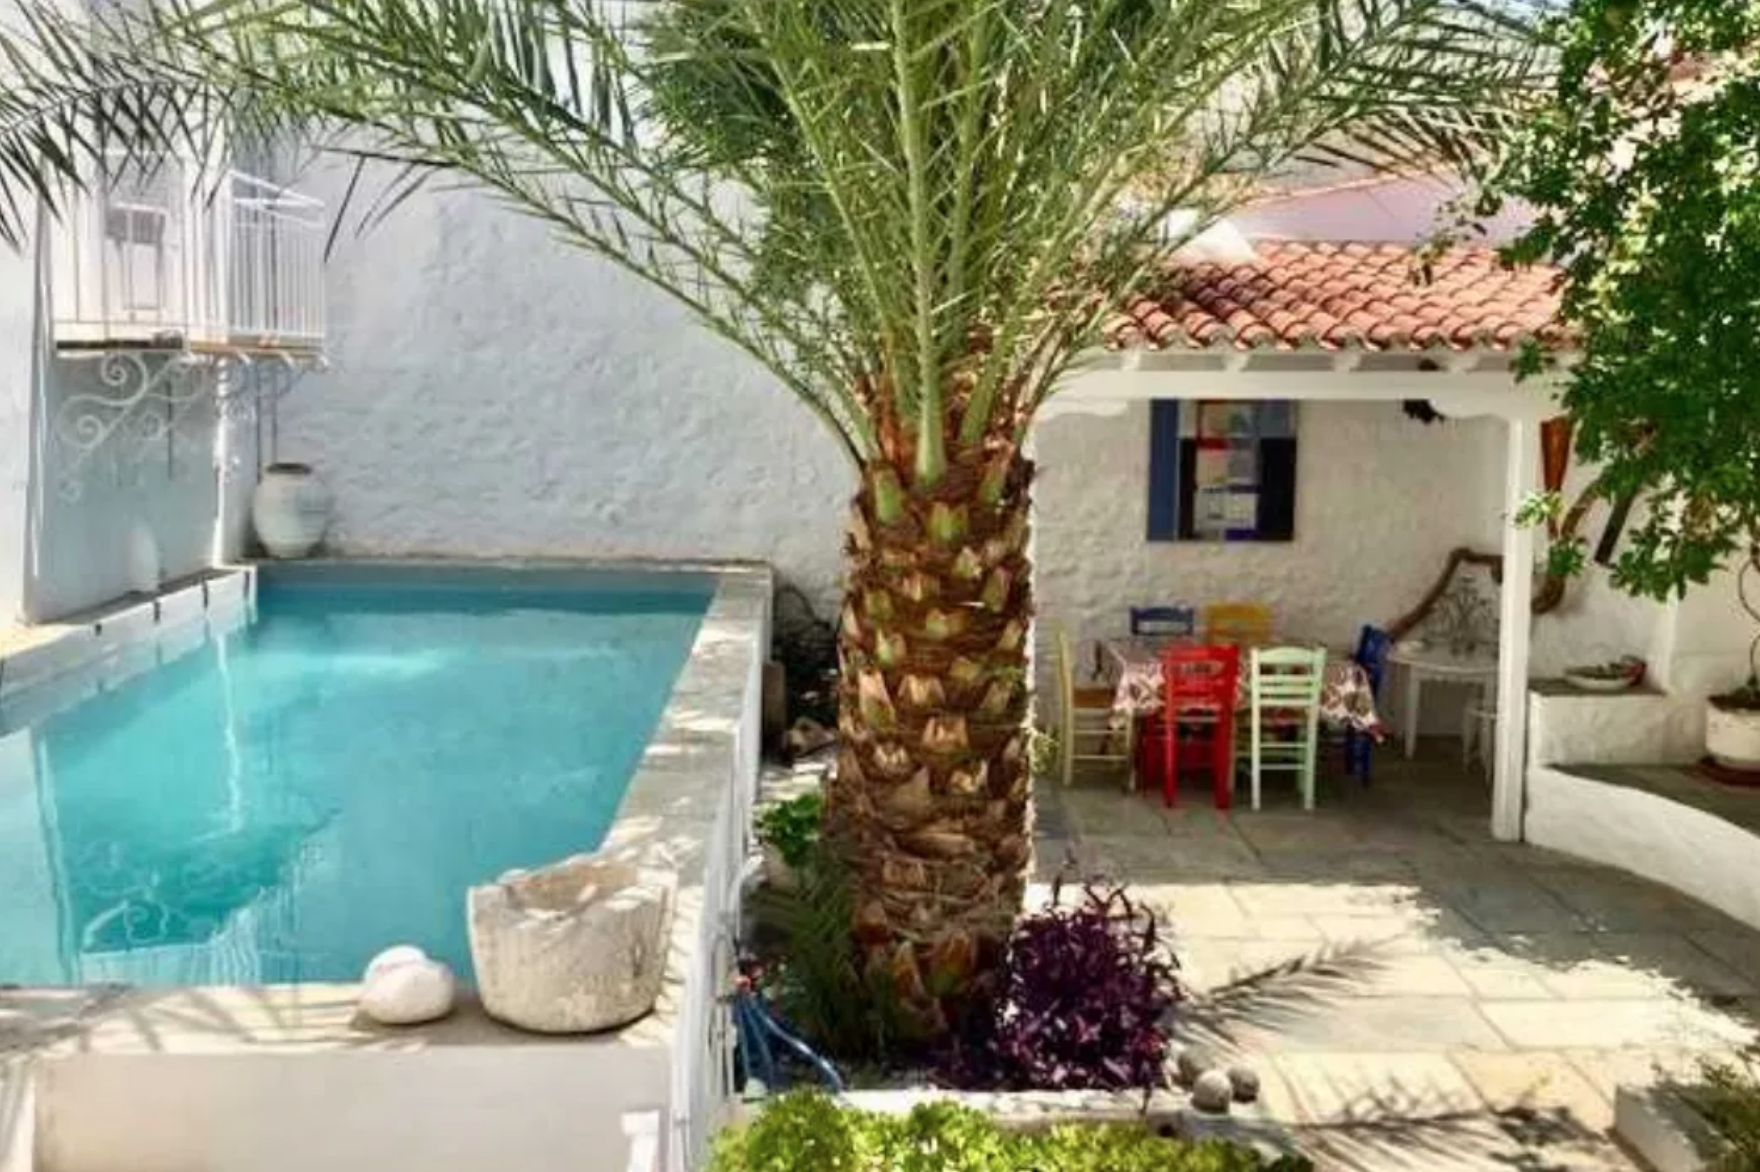 Private holiday rental with swimming pool to sleep a maximum 6 guests in Hydra town for limited dates in 2024, Hydra Island Greece